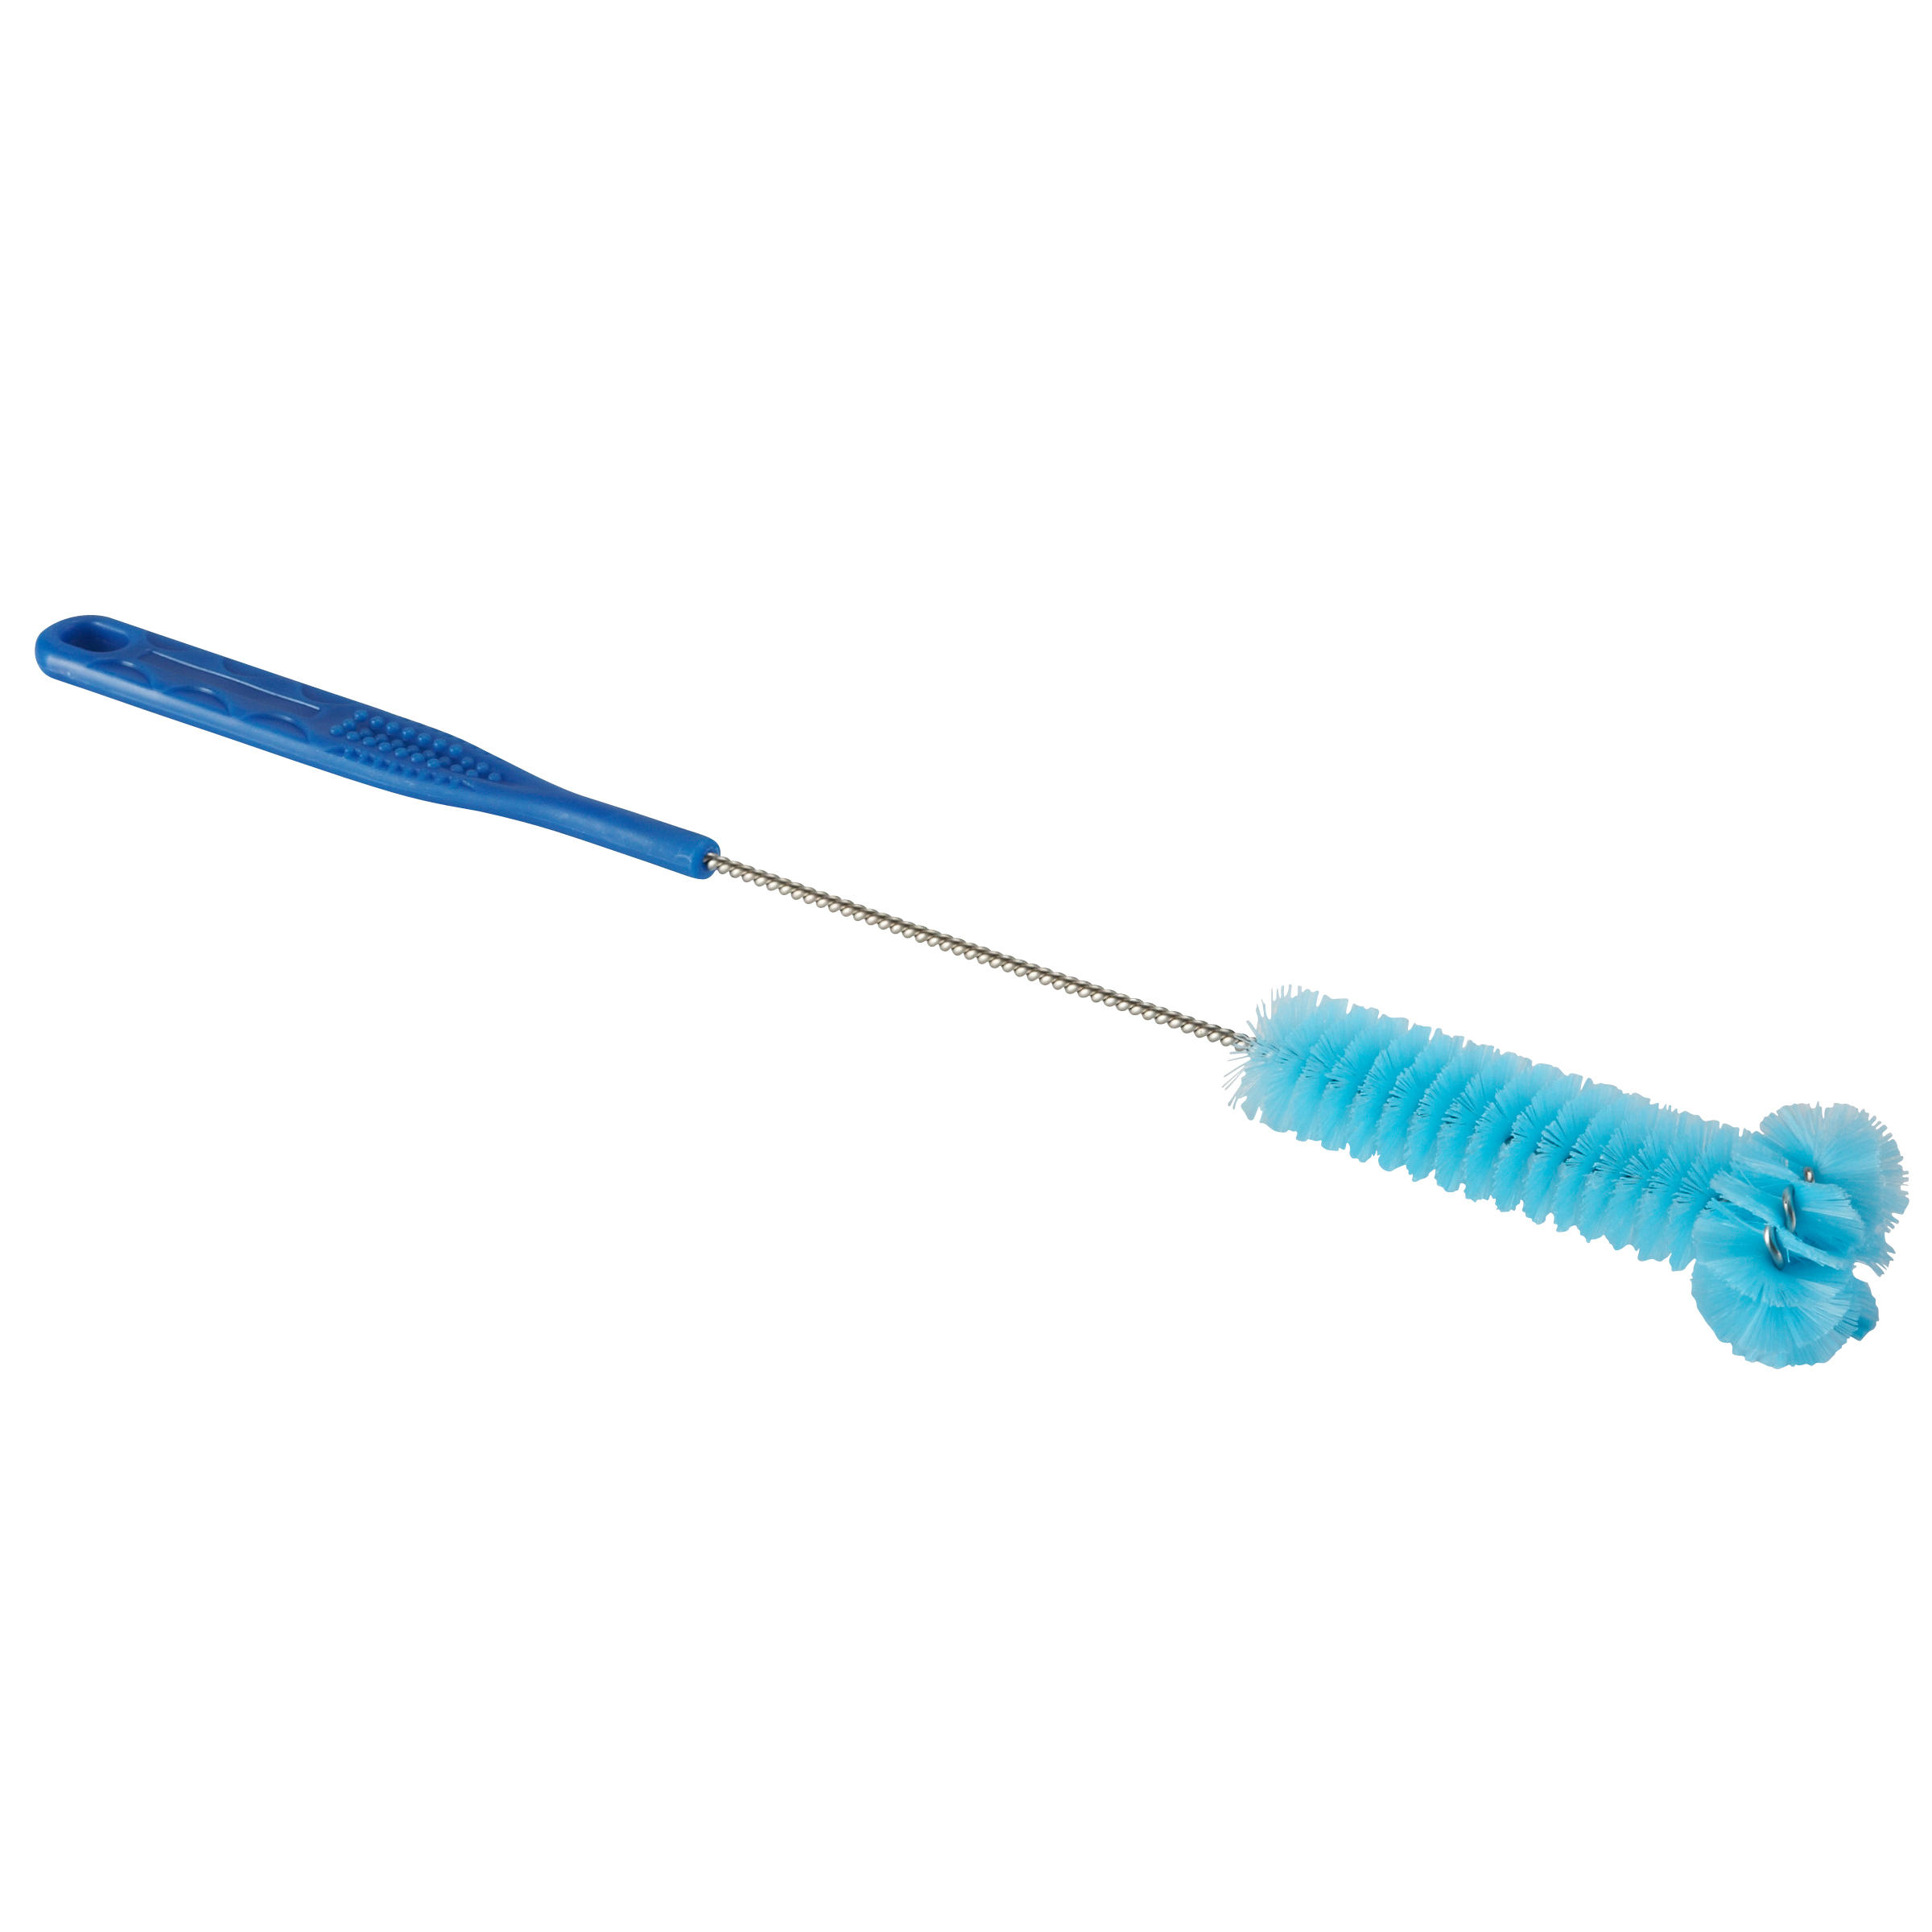 Hydration Bladder Cleaning Kit - Blue - BTWIN